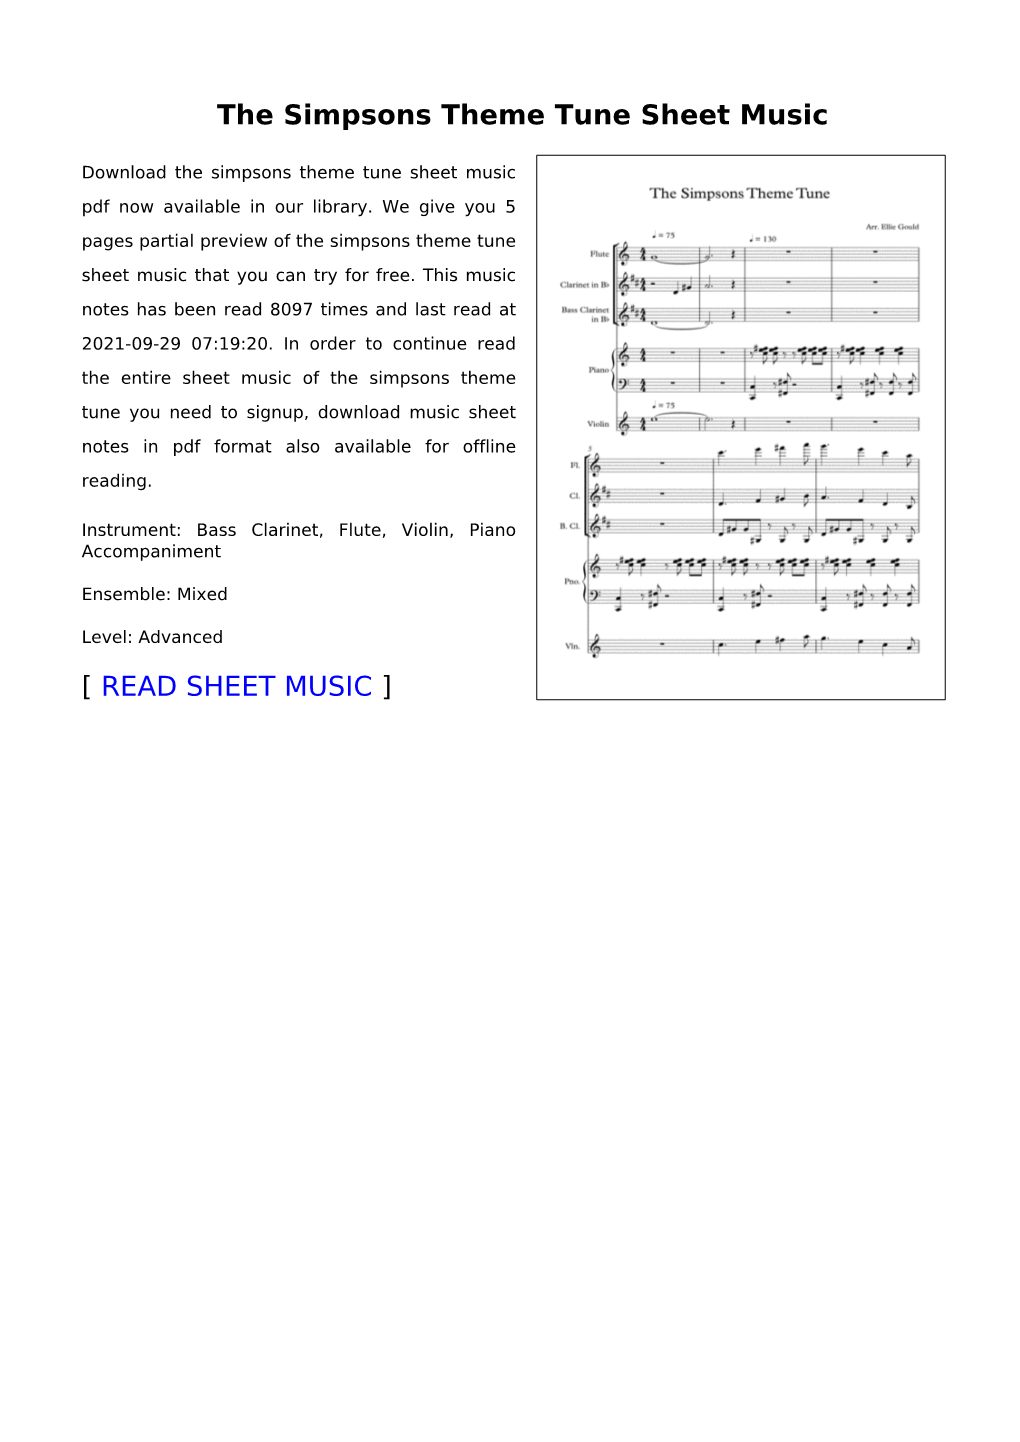 The Simpsons Theme Tune Sheet Music